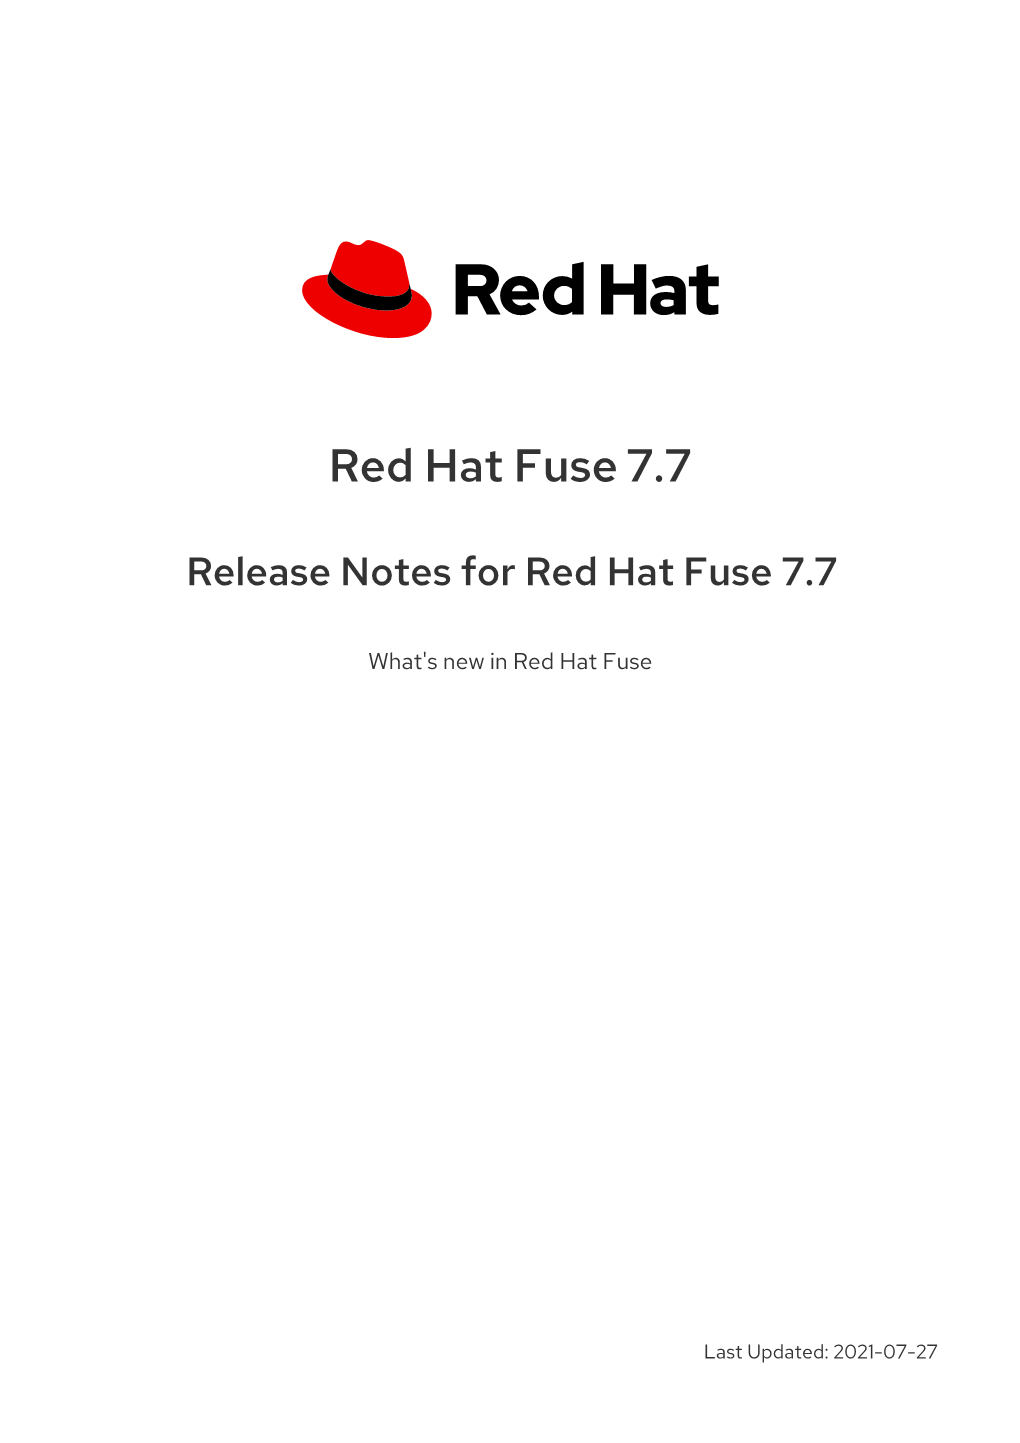 Release Notes for Red Hat Fuse 7.7